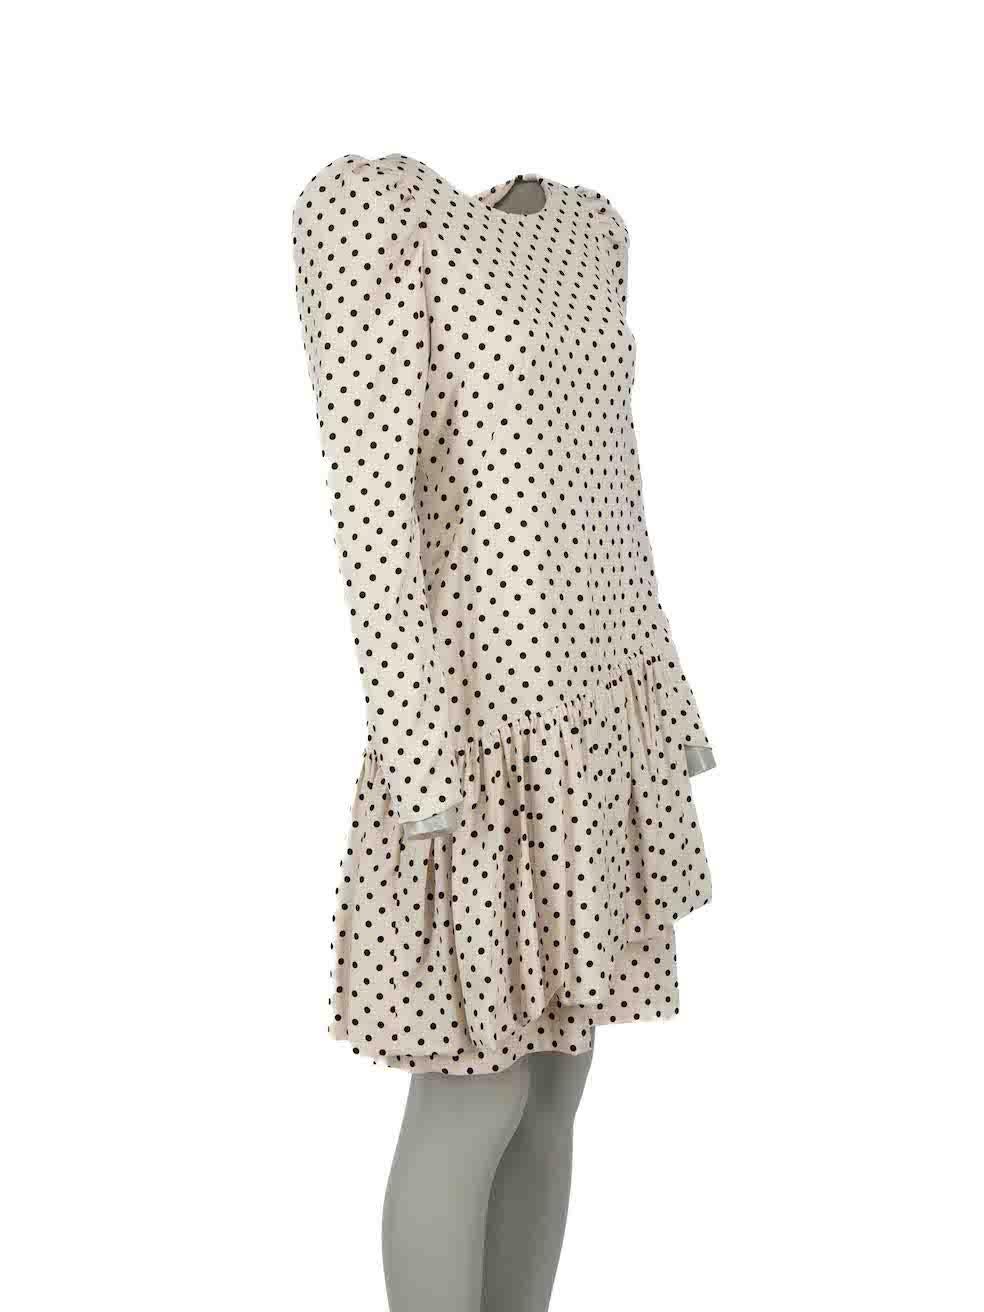 CONDITION is Never worn, with tags. No visible wear to dress is evident on this new Rejina Pyo designer resale item.
 
Details
Cream
Polyester
Knee length dress
Polkadot pattern
Round neckline
Buttoned cuff
Asymmetric hem
Back zip closure with hook